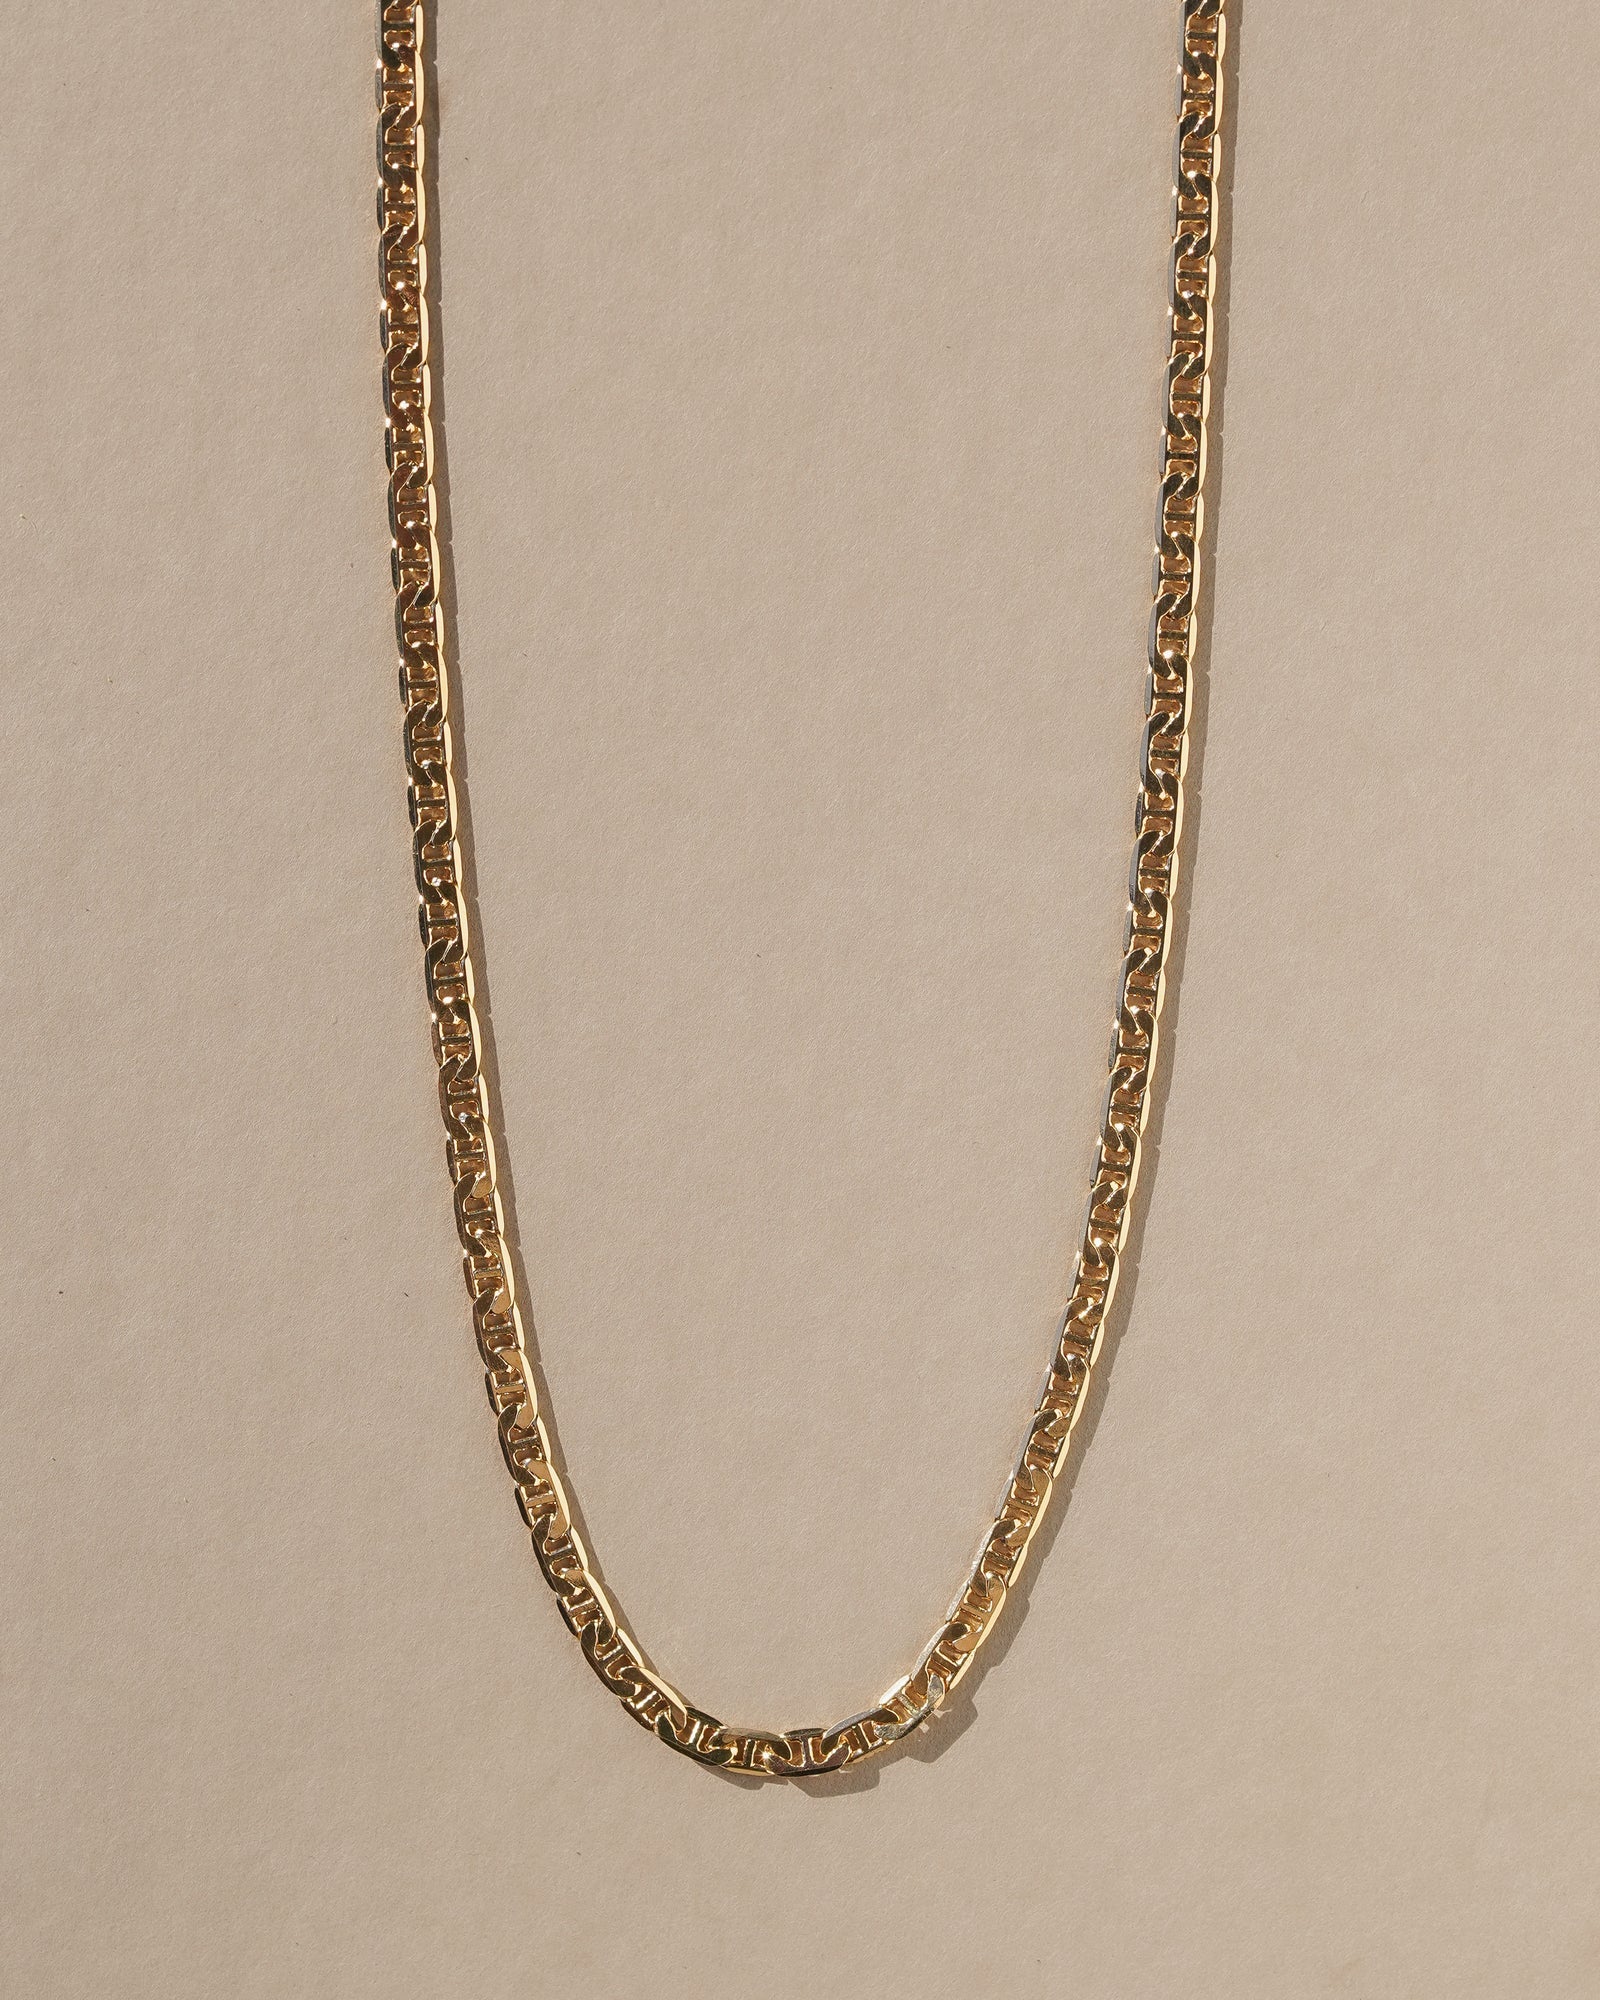 A simple braided chain intended to provide a ring of protection and luck when worn. 18k gold filled chain. Handmade in the Santa Cruz Mountains.